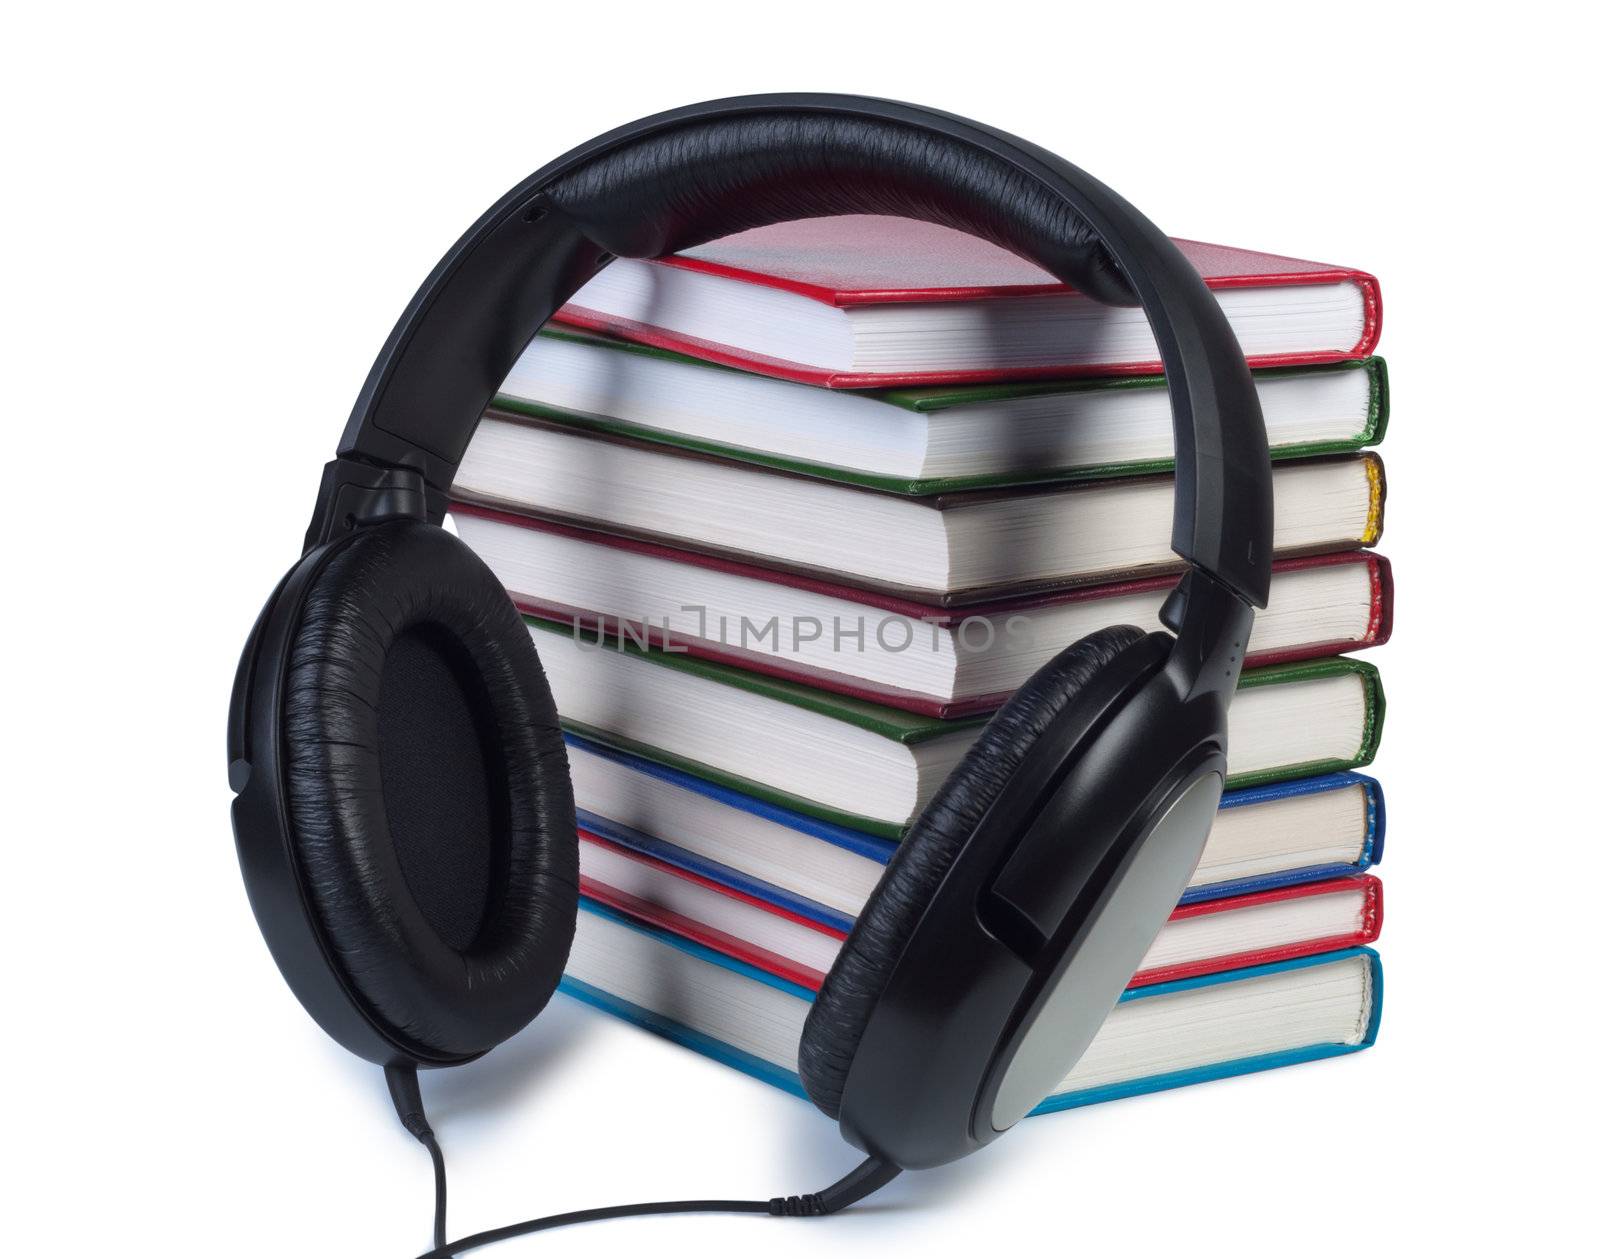 Headphones and stack of books isolated on white background.